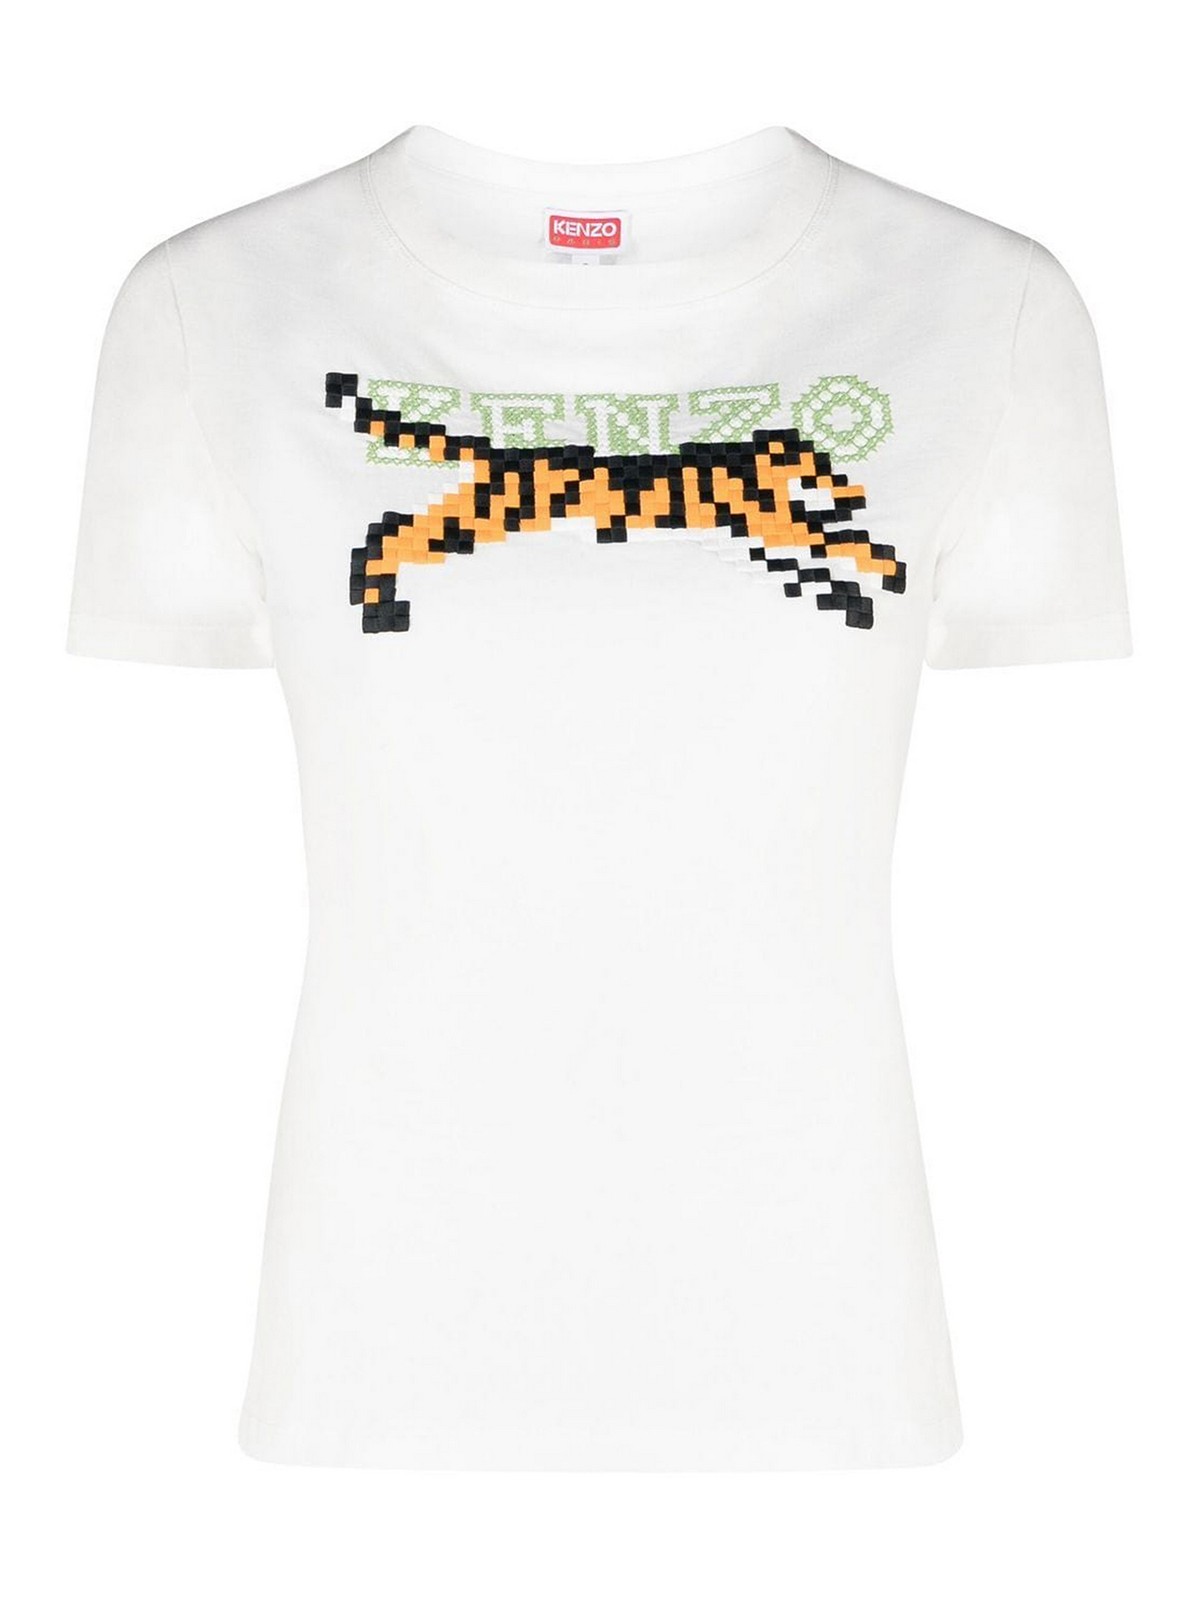 Kenzo Embroidery Design Tee In White